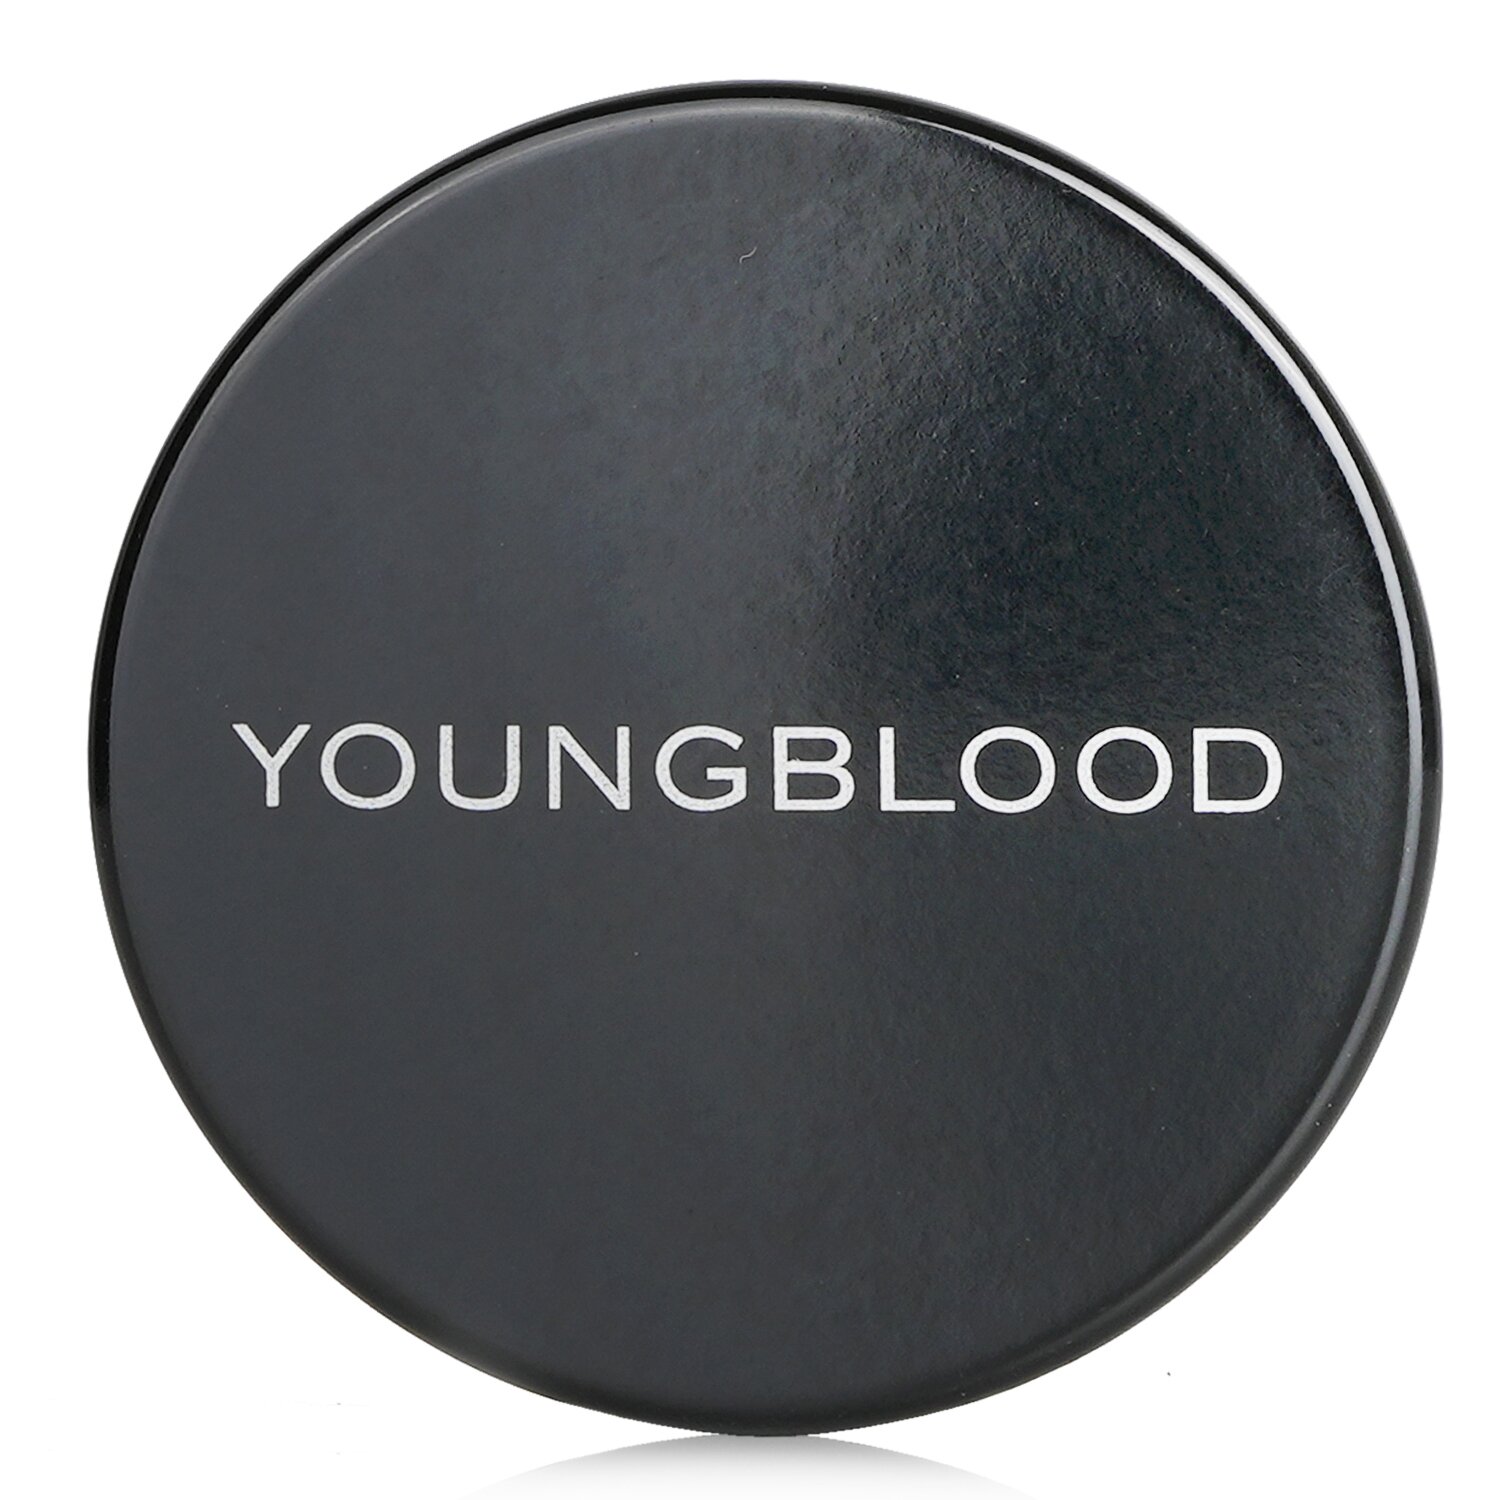 Youngblood Base Maquillaje Natural Mineral Polvos Sueltos 10g/0.35oz